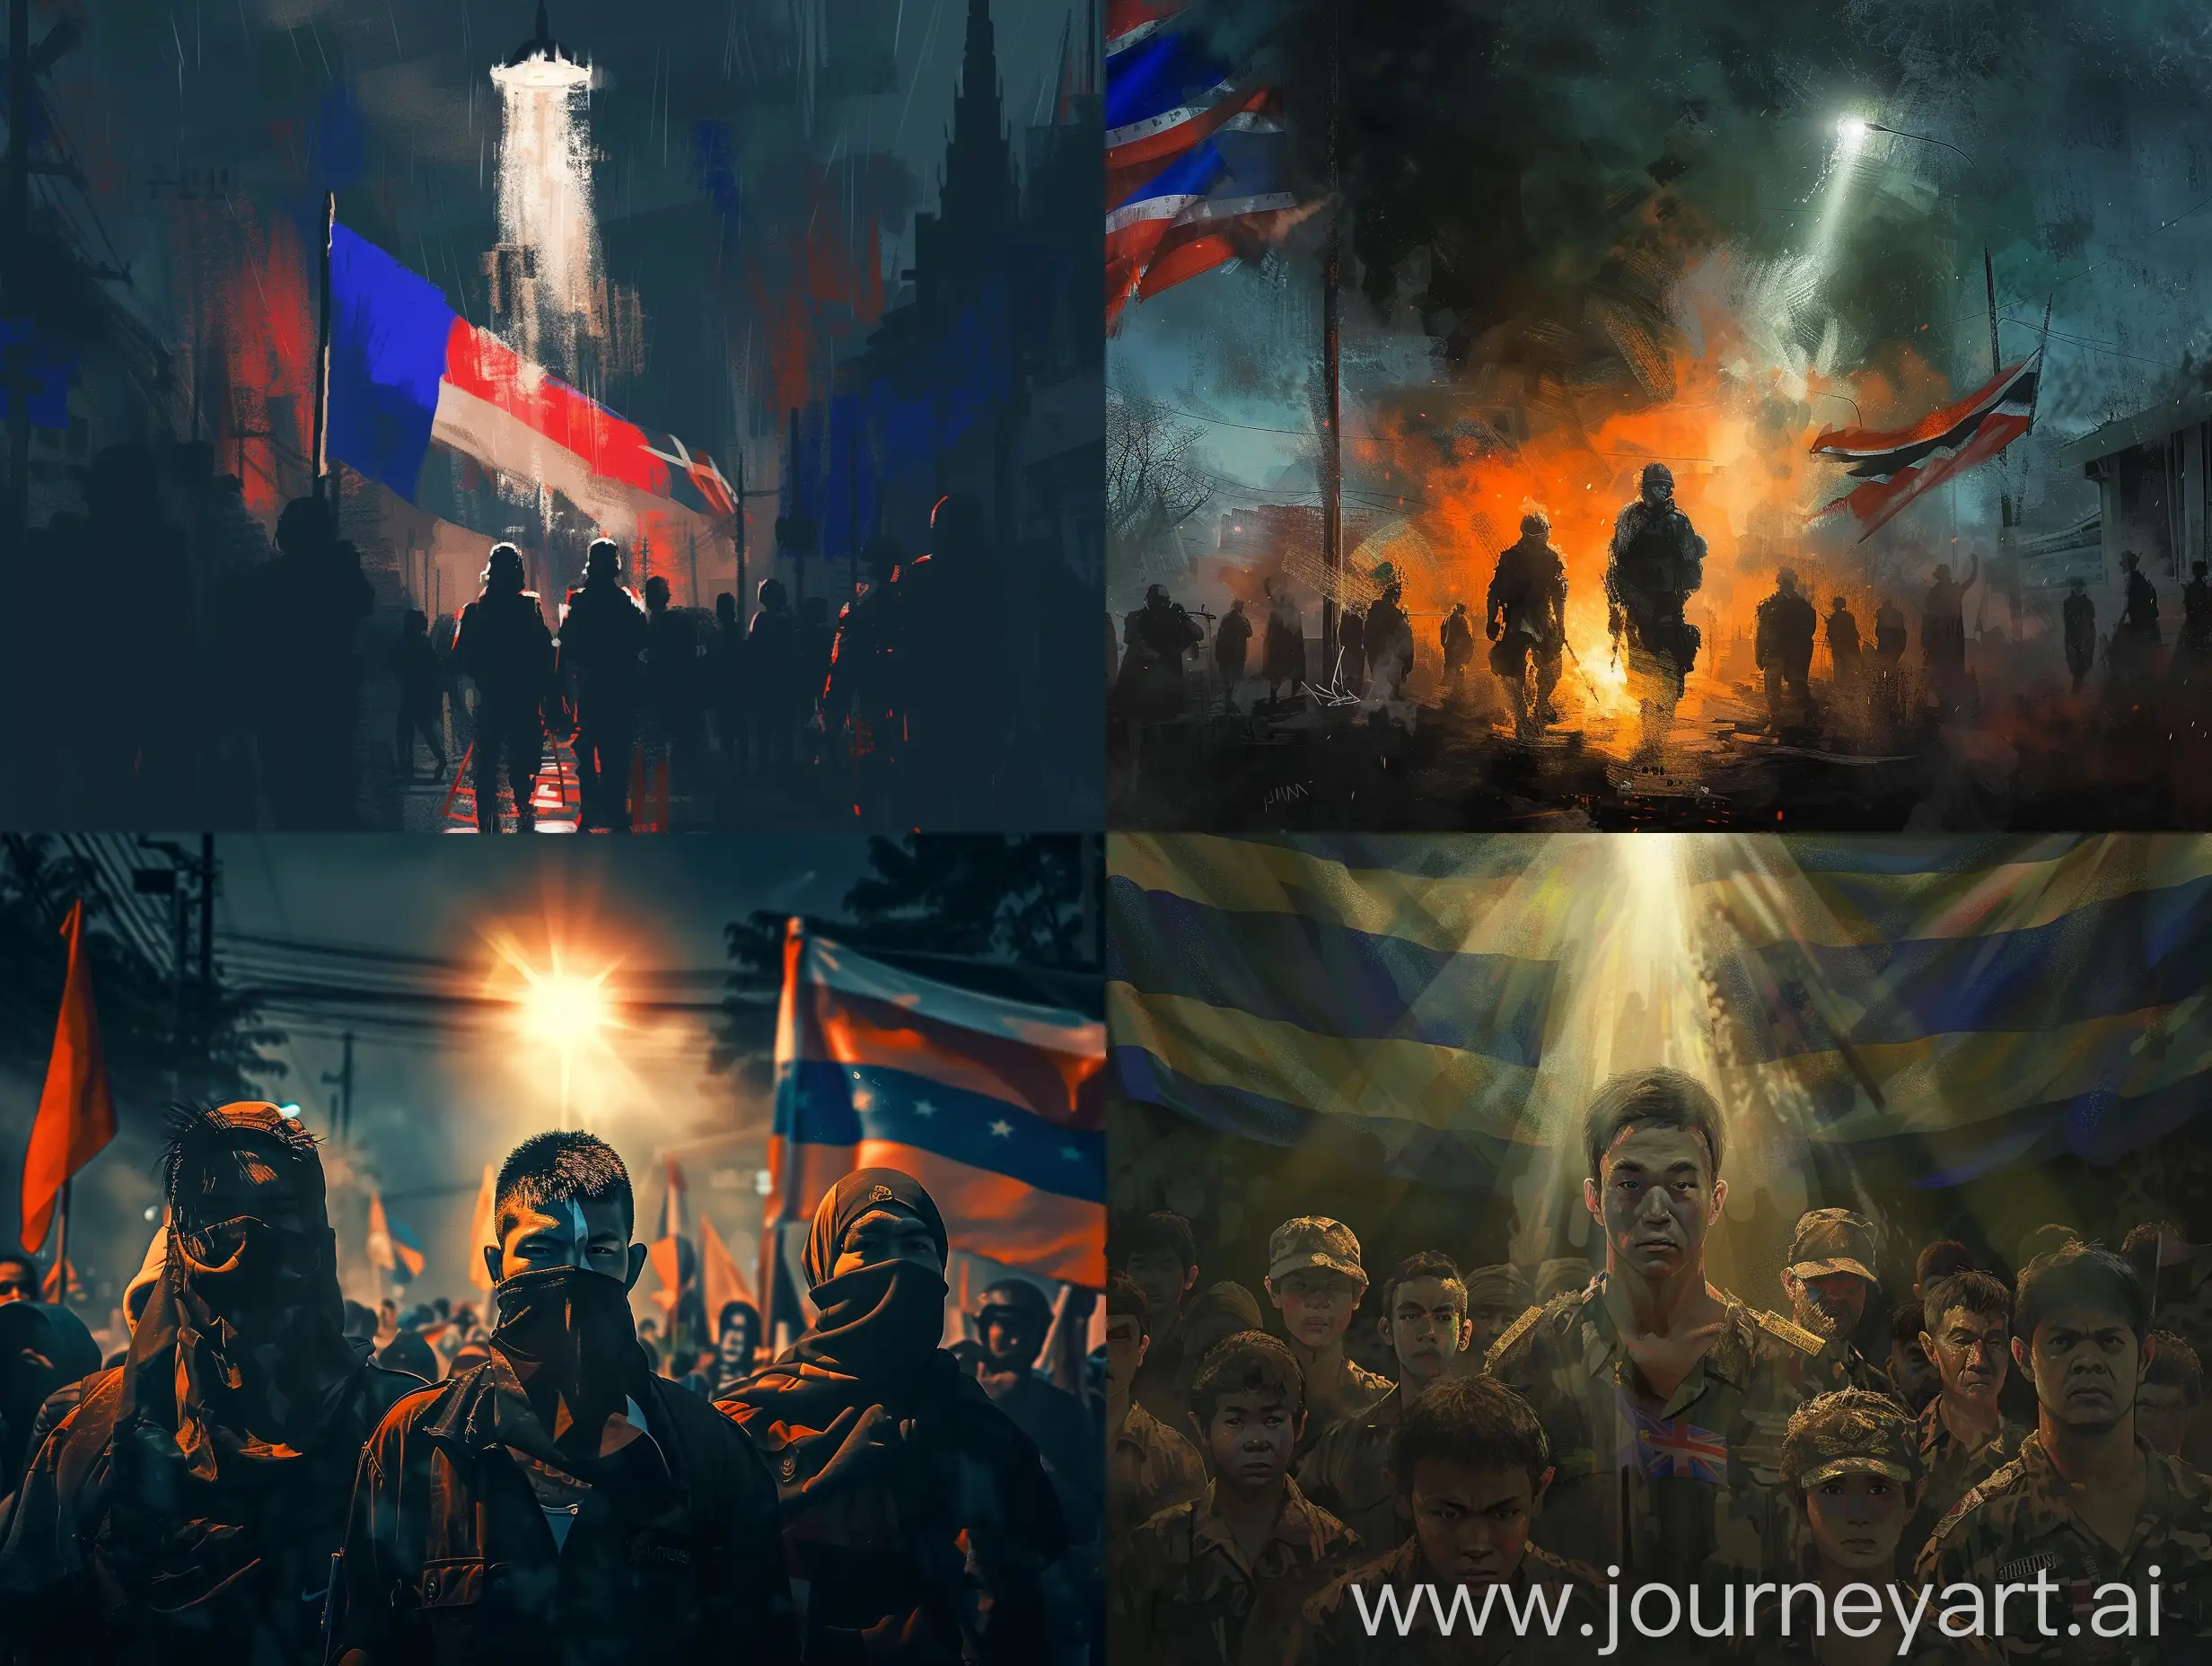 thailand protest in 2022.have 2 people in center that look exactly like IVAN THE TERRIBLE AND HIS SON BY ILYA REPIN.have spot light.thai flag

